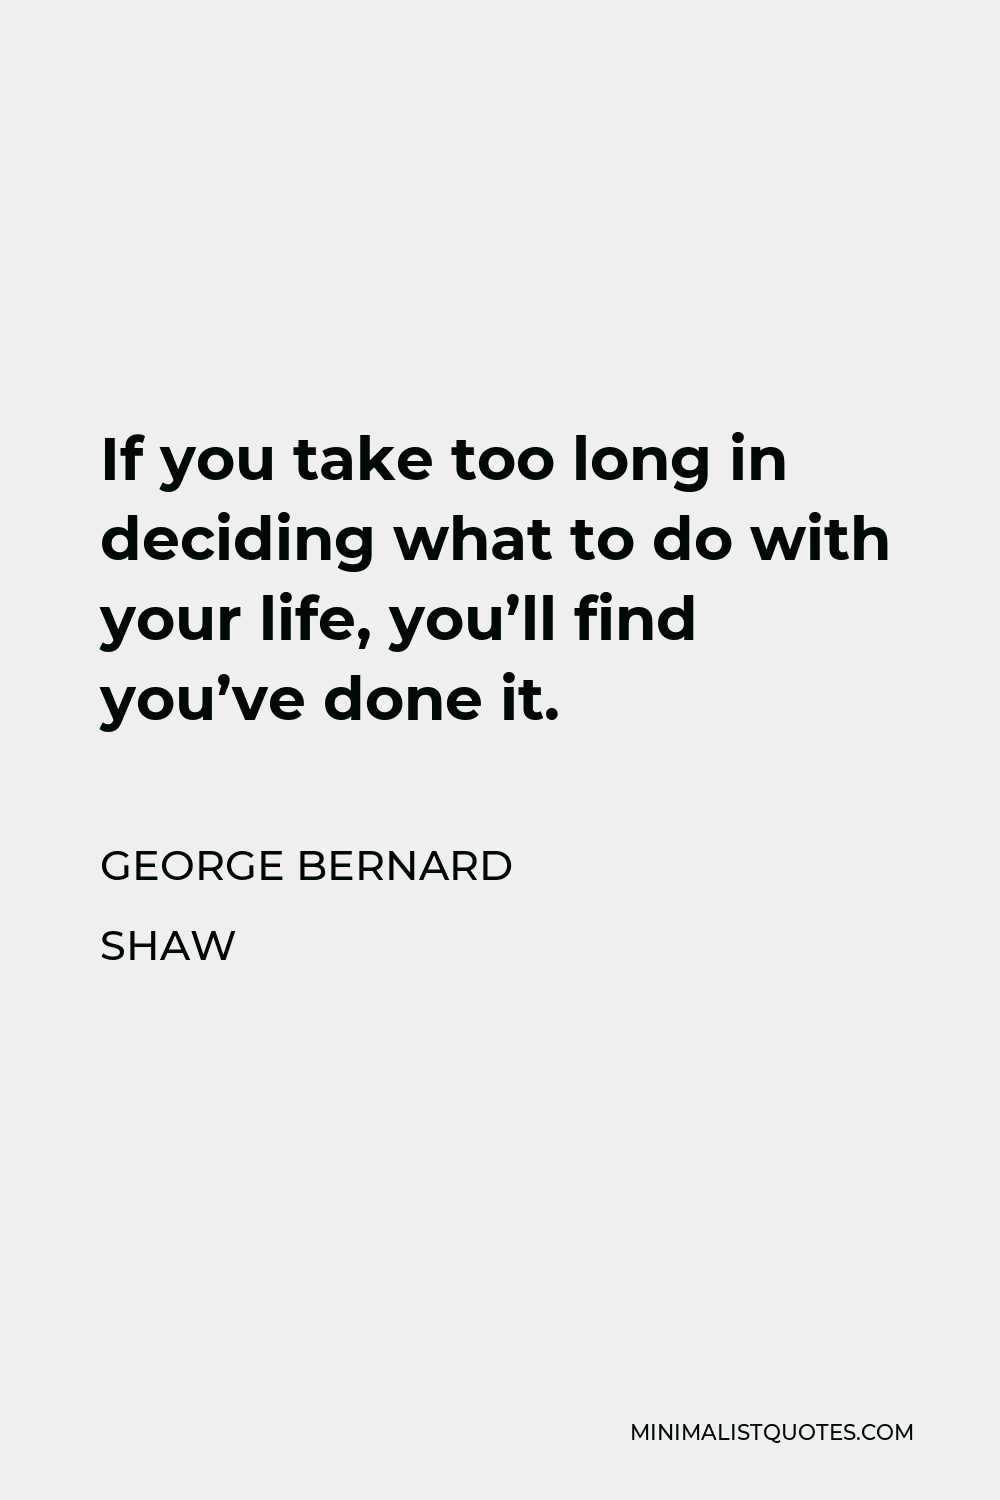 George Bernard Shaw Quote - If you take too long in deciding what to do with your life, you’ll find you’ve done it.